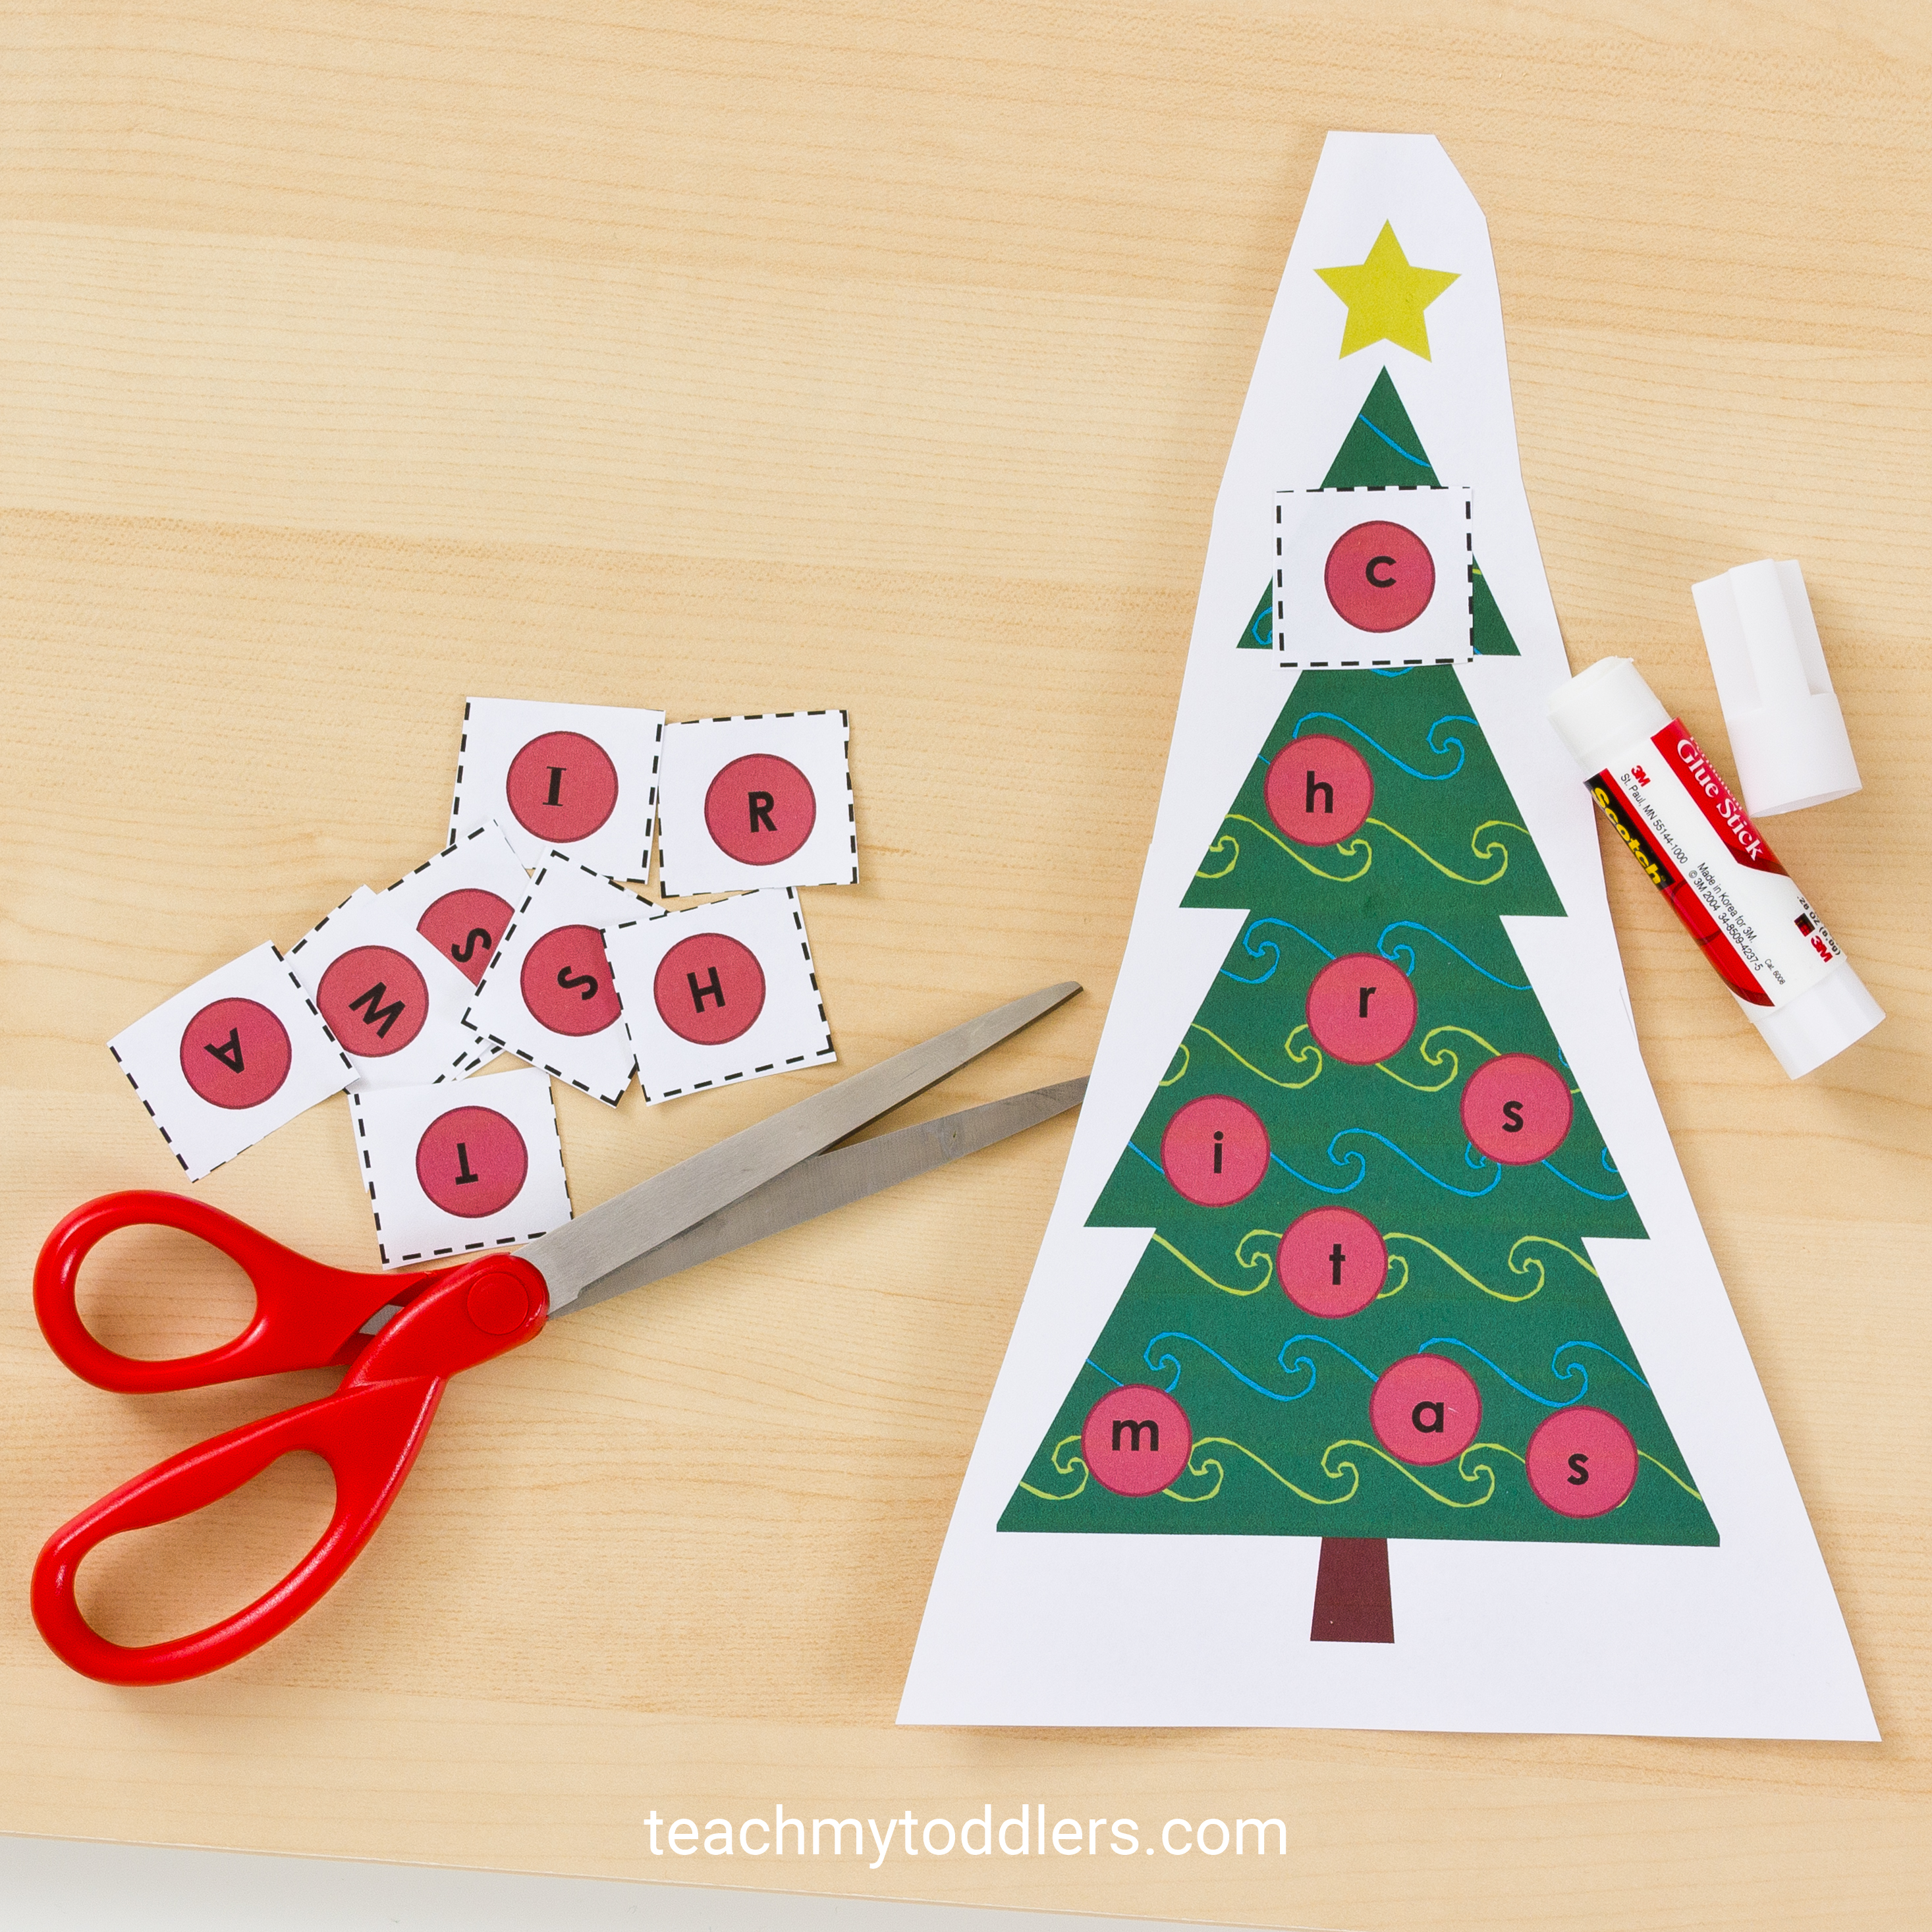 Teach your toddlers letters and colors with these fun christmas tree activities